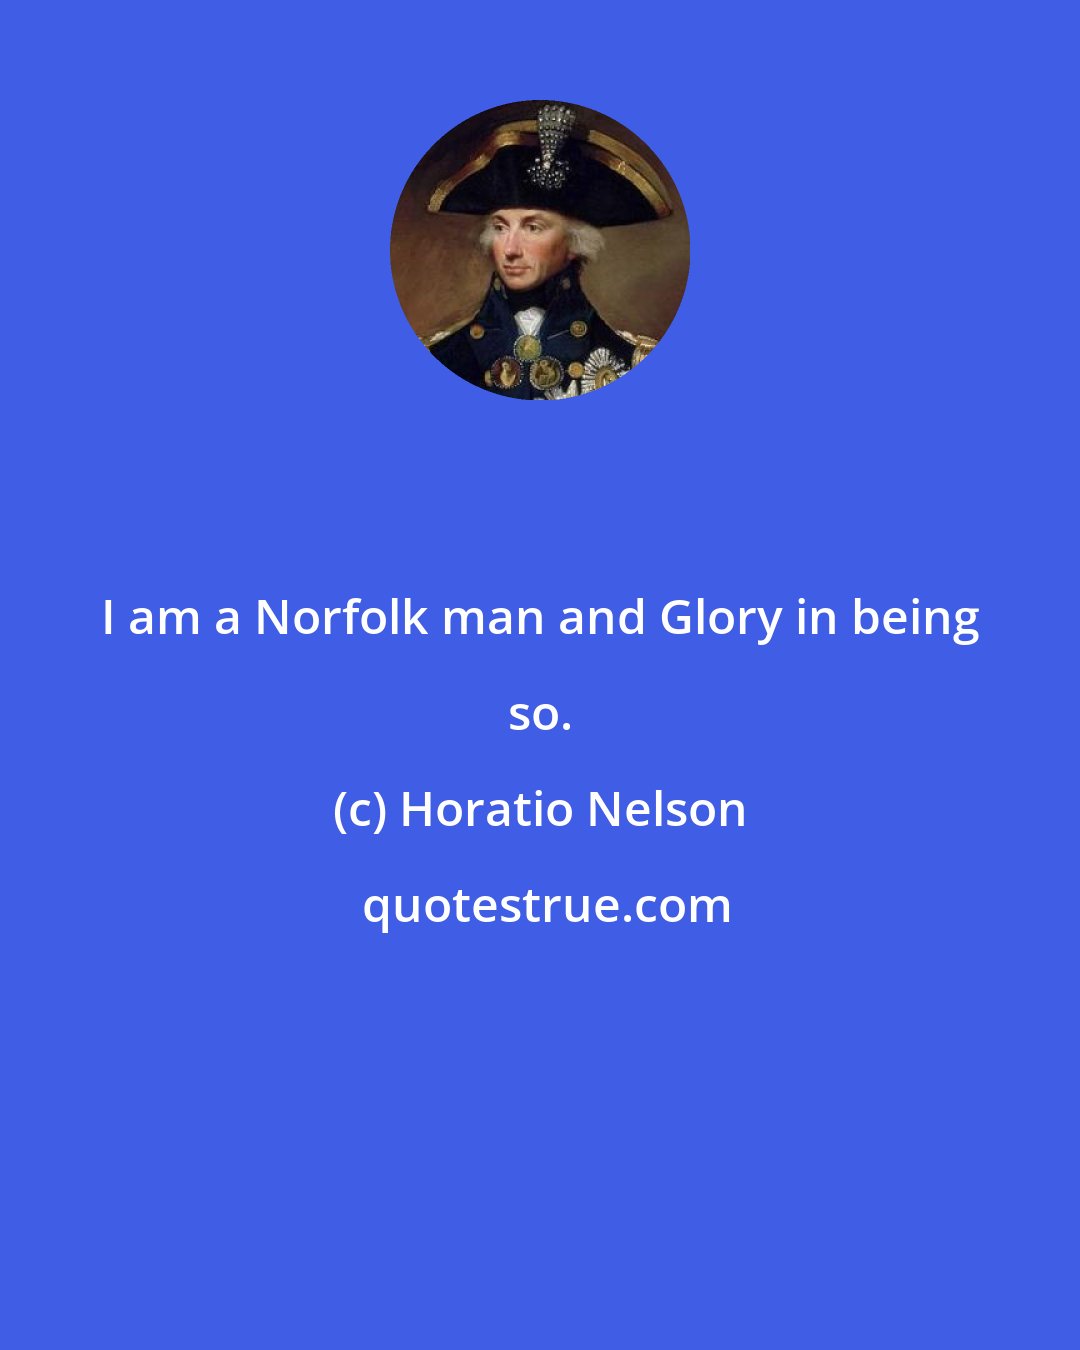 Horatio Nelson: I am a Norfolk man and Glory in being so.